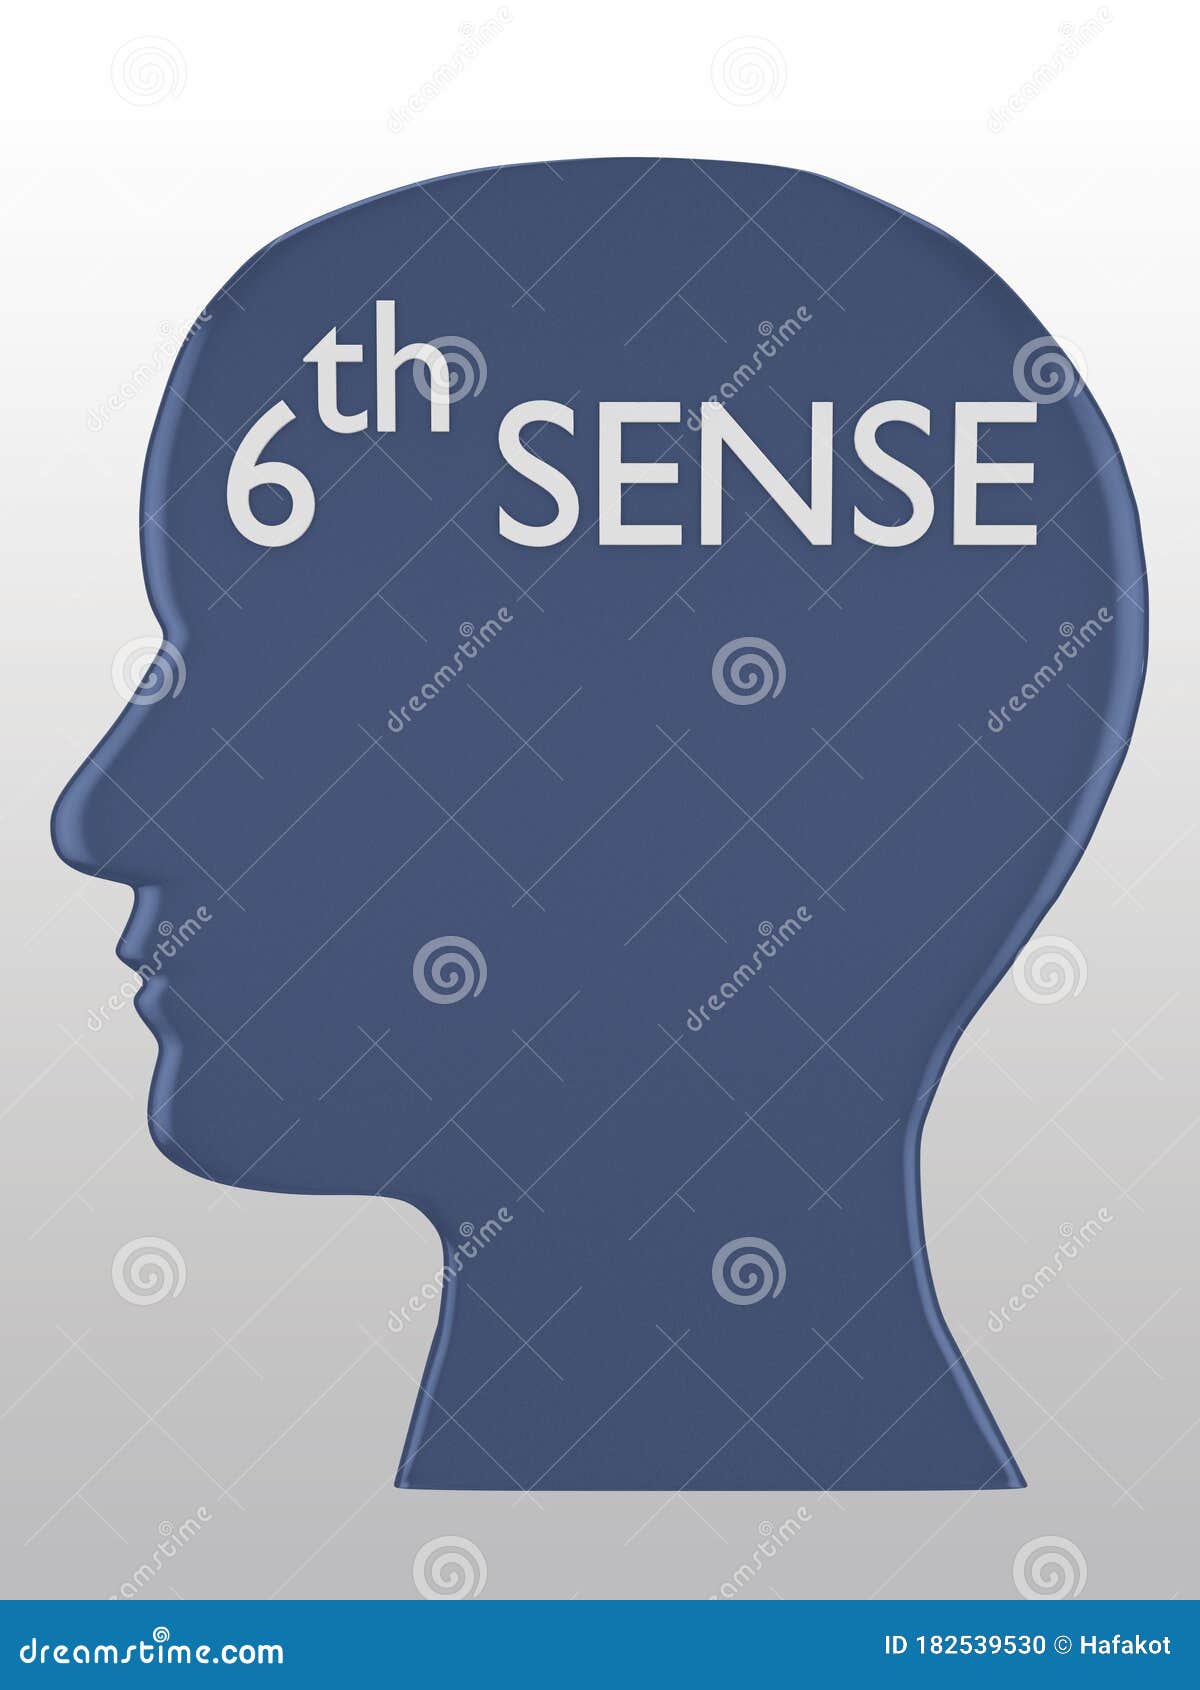 https://thumbs.dreamstime.com/z/sixth-sense-concept-d-illustration-head-silhouette-containing-text-th-isolated-over-gray-gradient-182539530.jpg